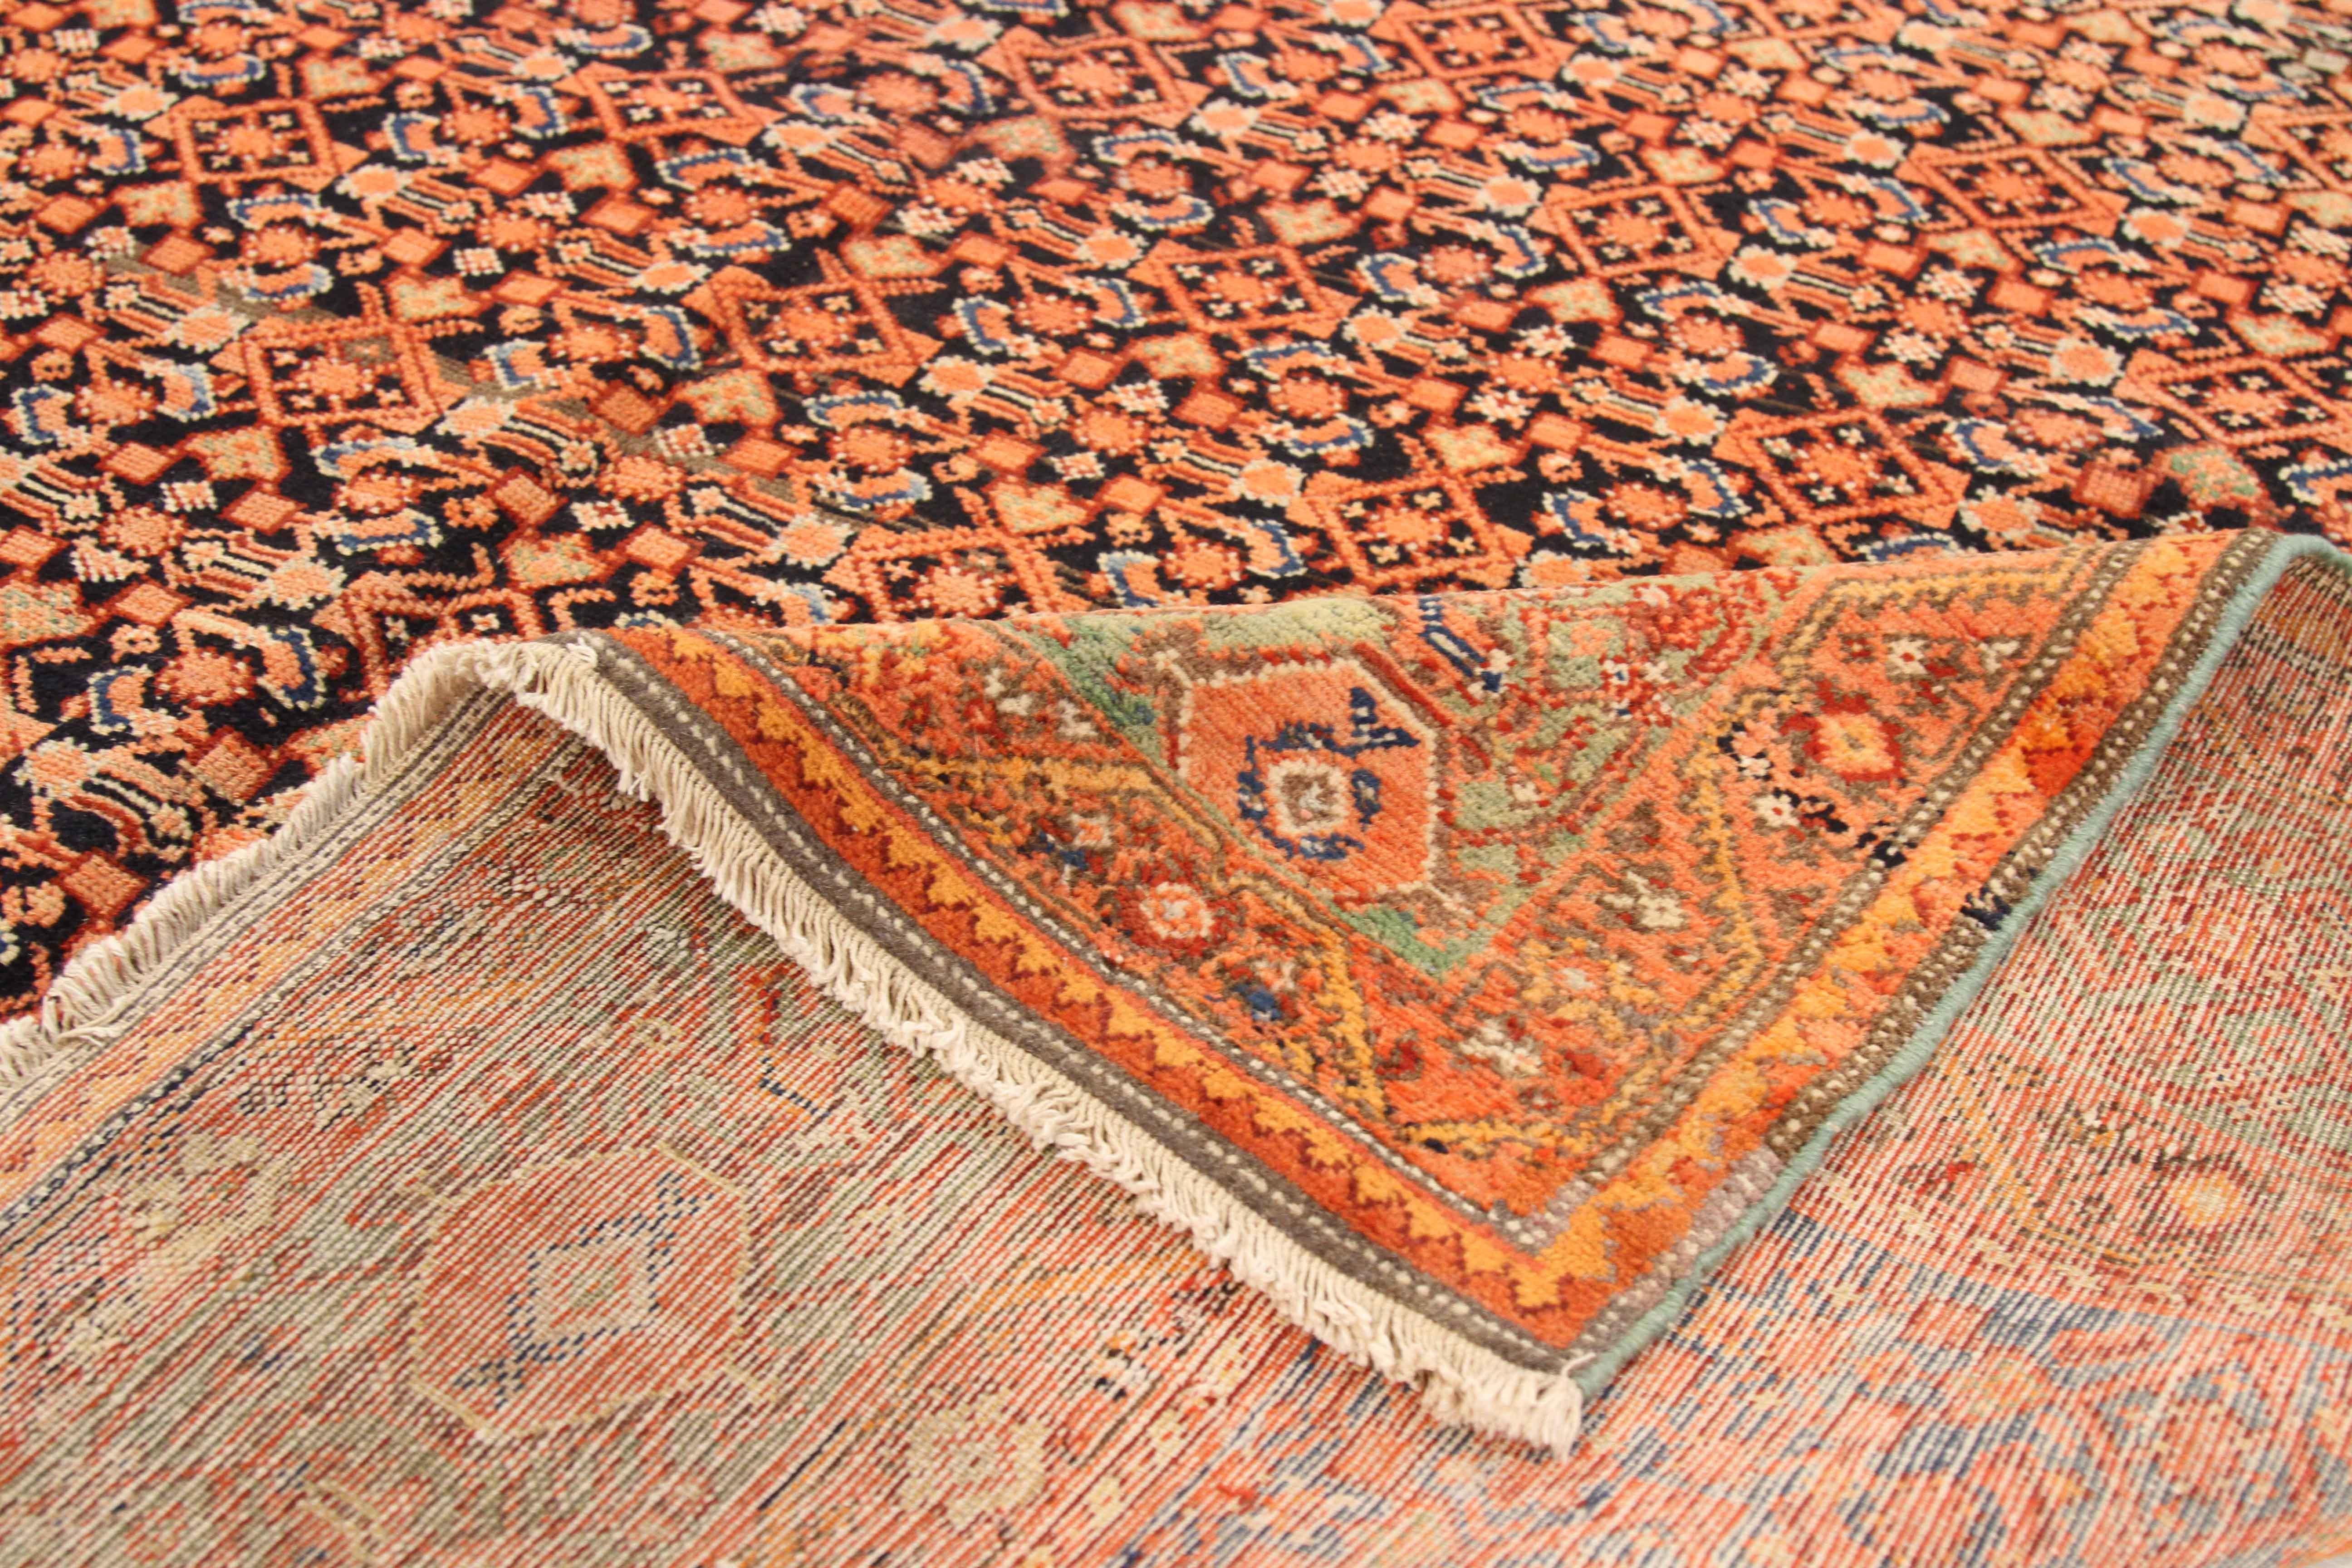 Antique Persian rug made from handspun fine wool and organic vegetable dyes. It features a bold rust and black ensemble of geometric and nature-inspired patterns that make it a great centerpiece in a contemporary and modern space. It has a dimension